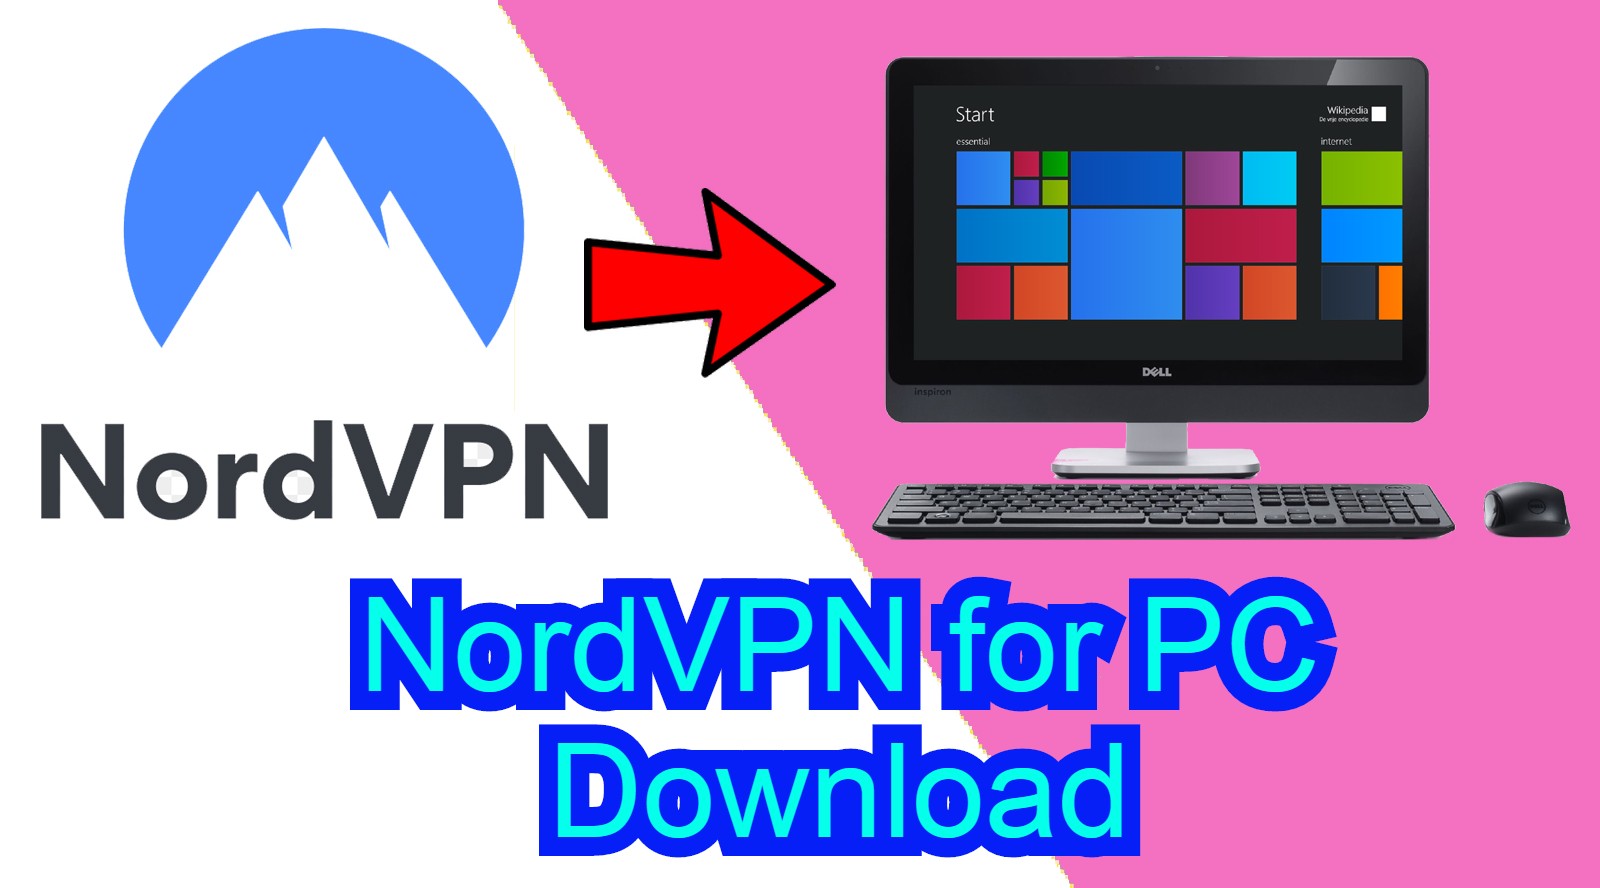 how to download nordvpn on windows pc